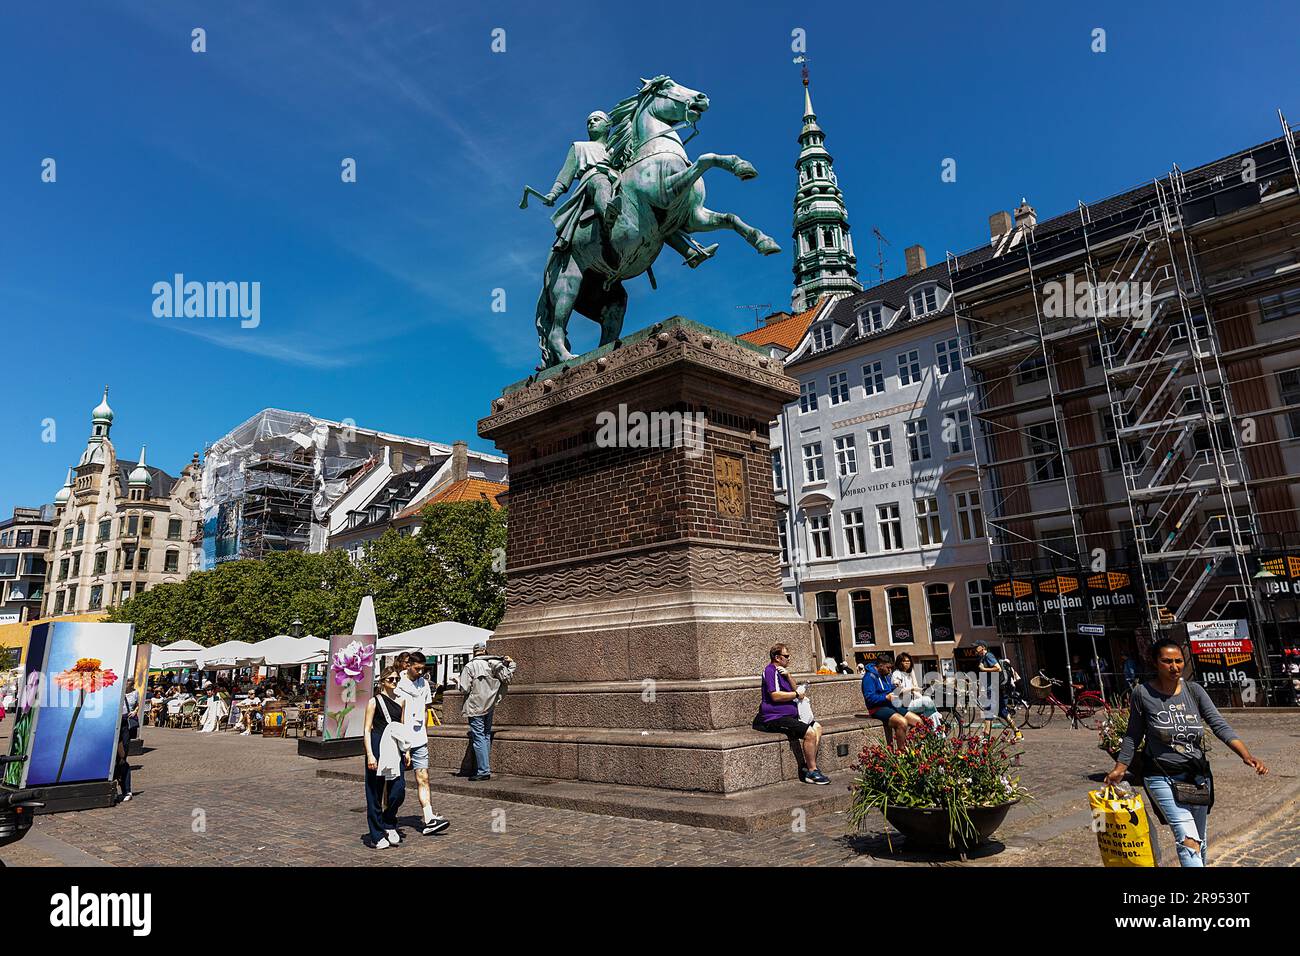 COPENHAGEN: The equestrian statue with the early medieval warrior bishop, Absalon, at Højbro Square seen on June 4, 2023 in Copenhagen, Denmark. Absal Stock Photo